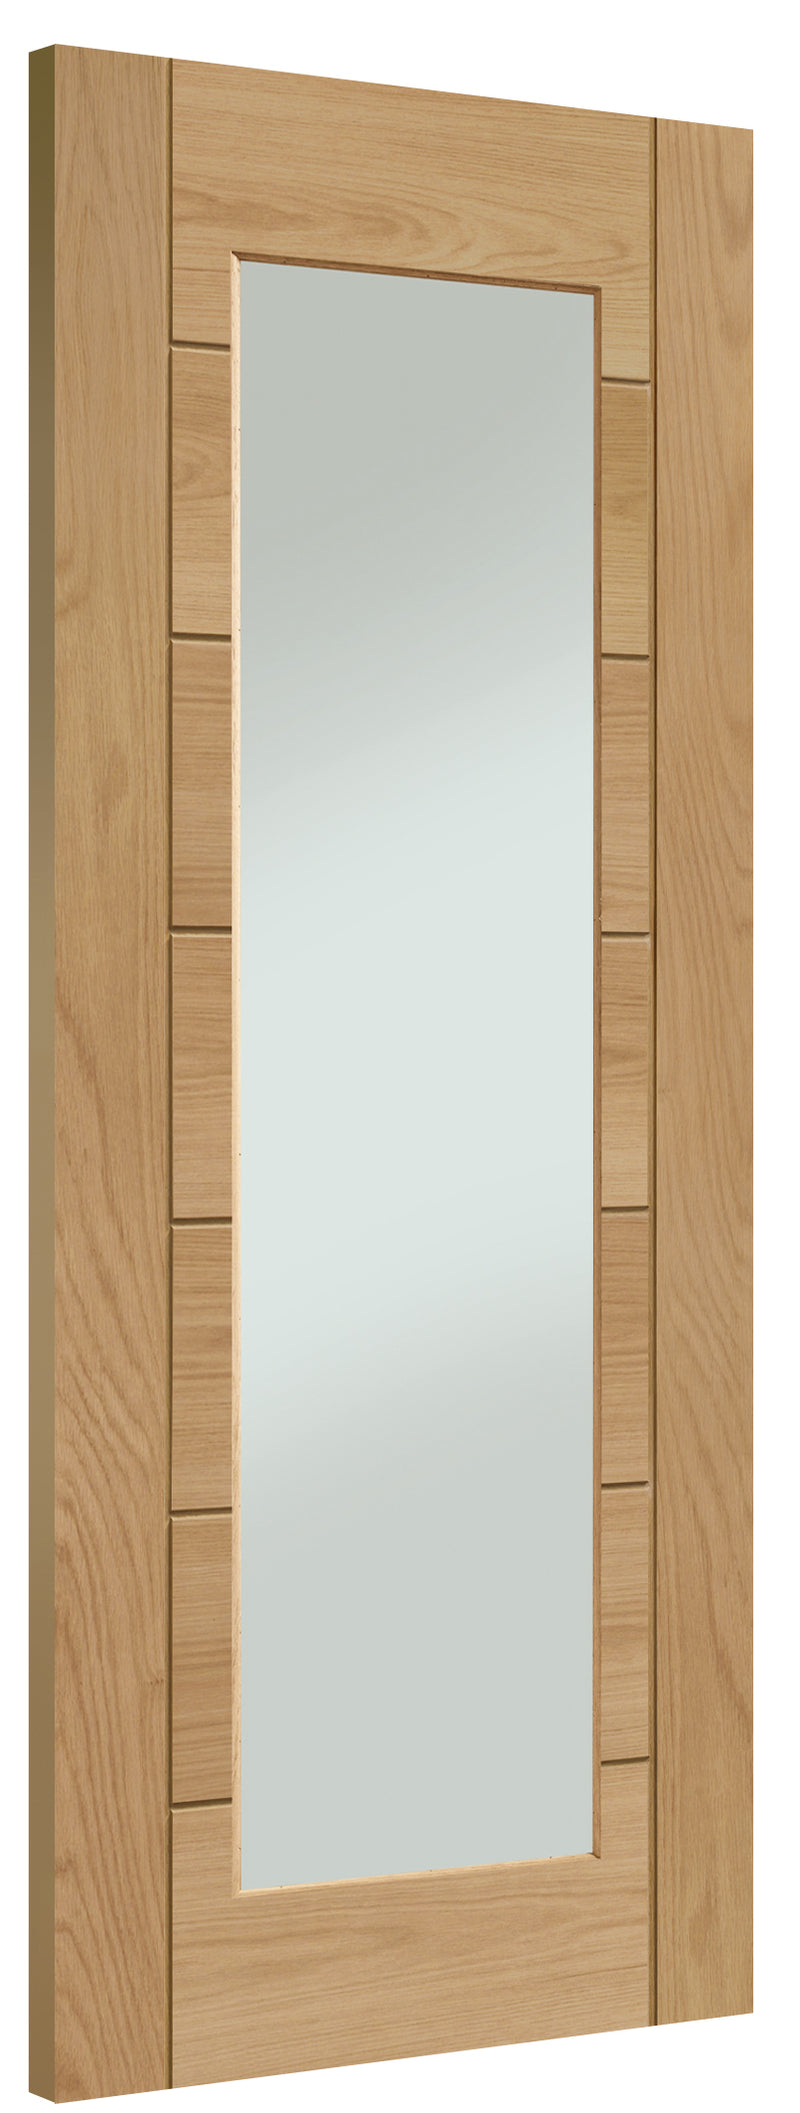 XL Joinery Internal Oak Essential Palermo Pre-Finished 1 Light with Clear Glass  Internal door